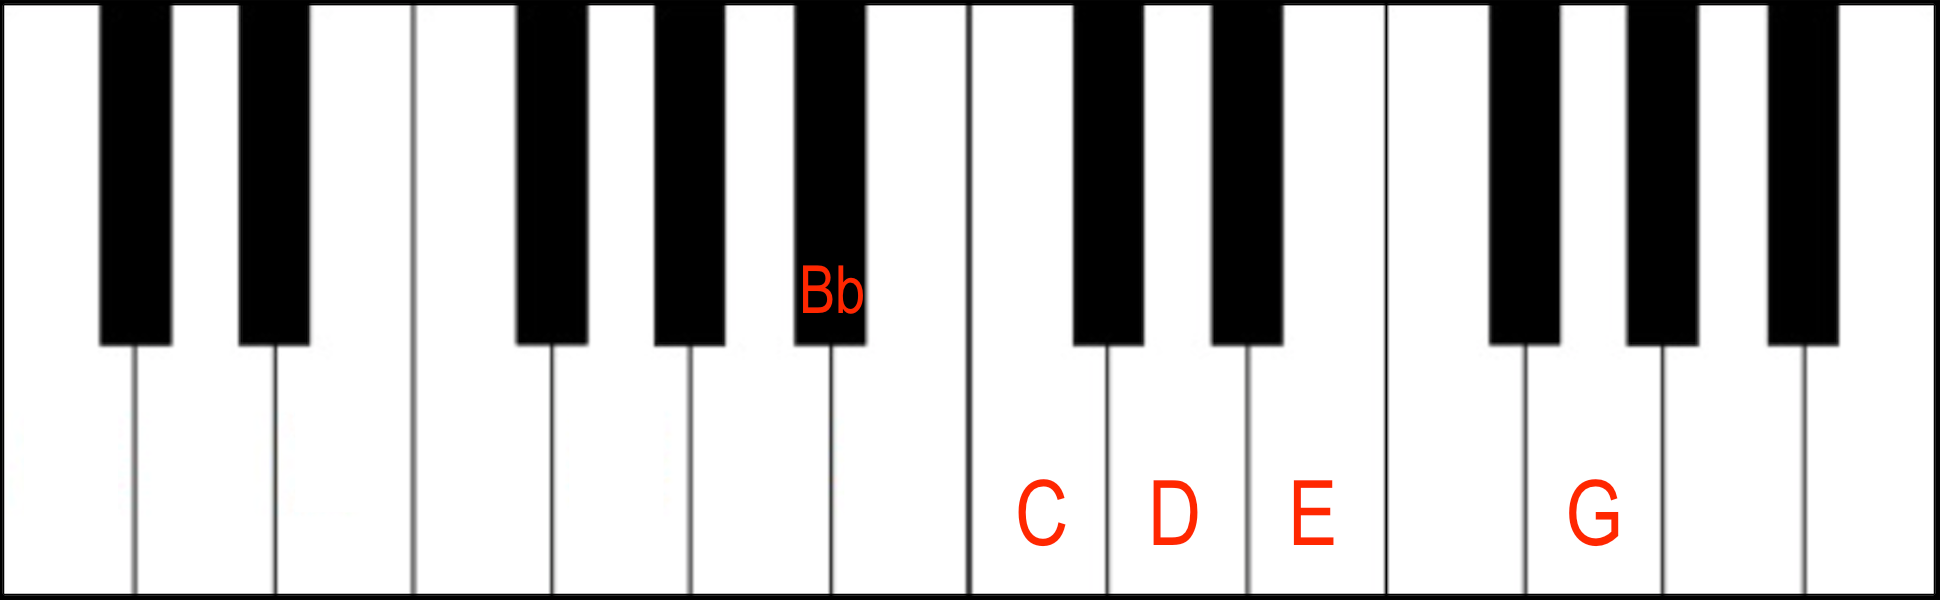 C9 Chord in 3rd Inversion